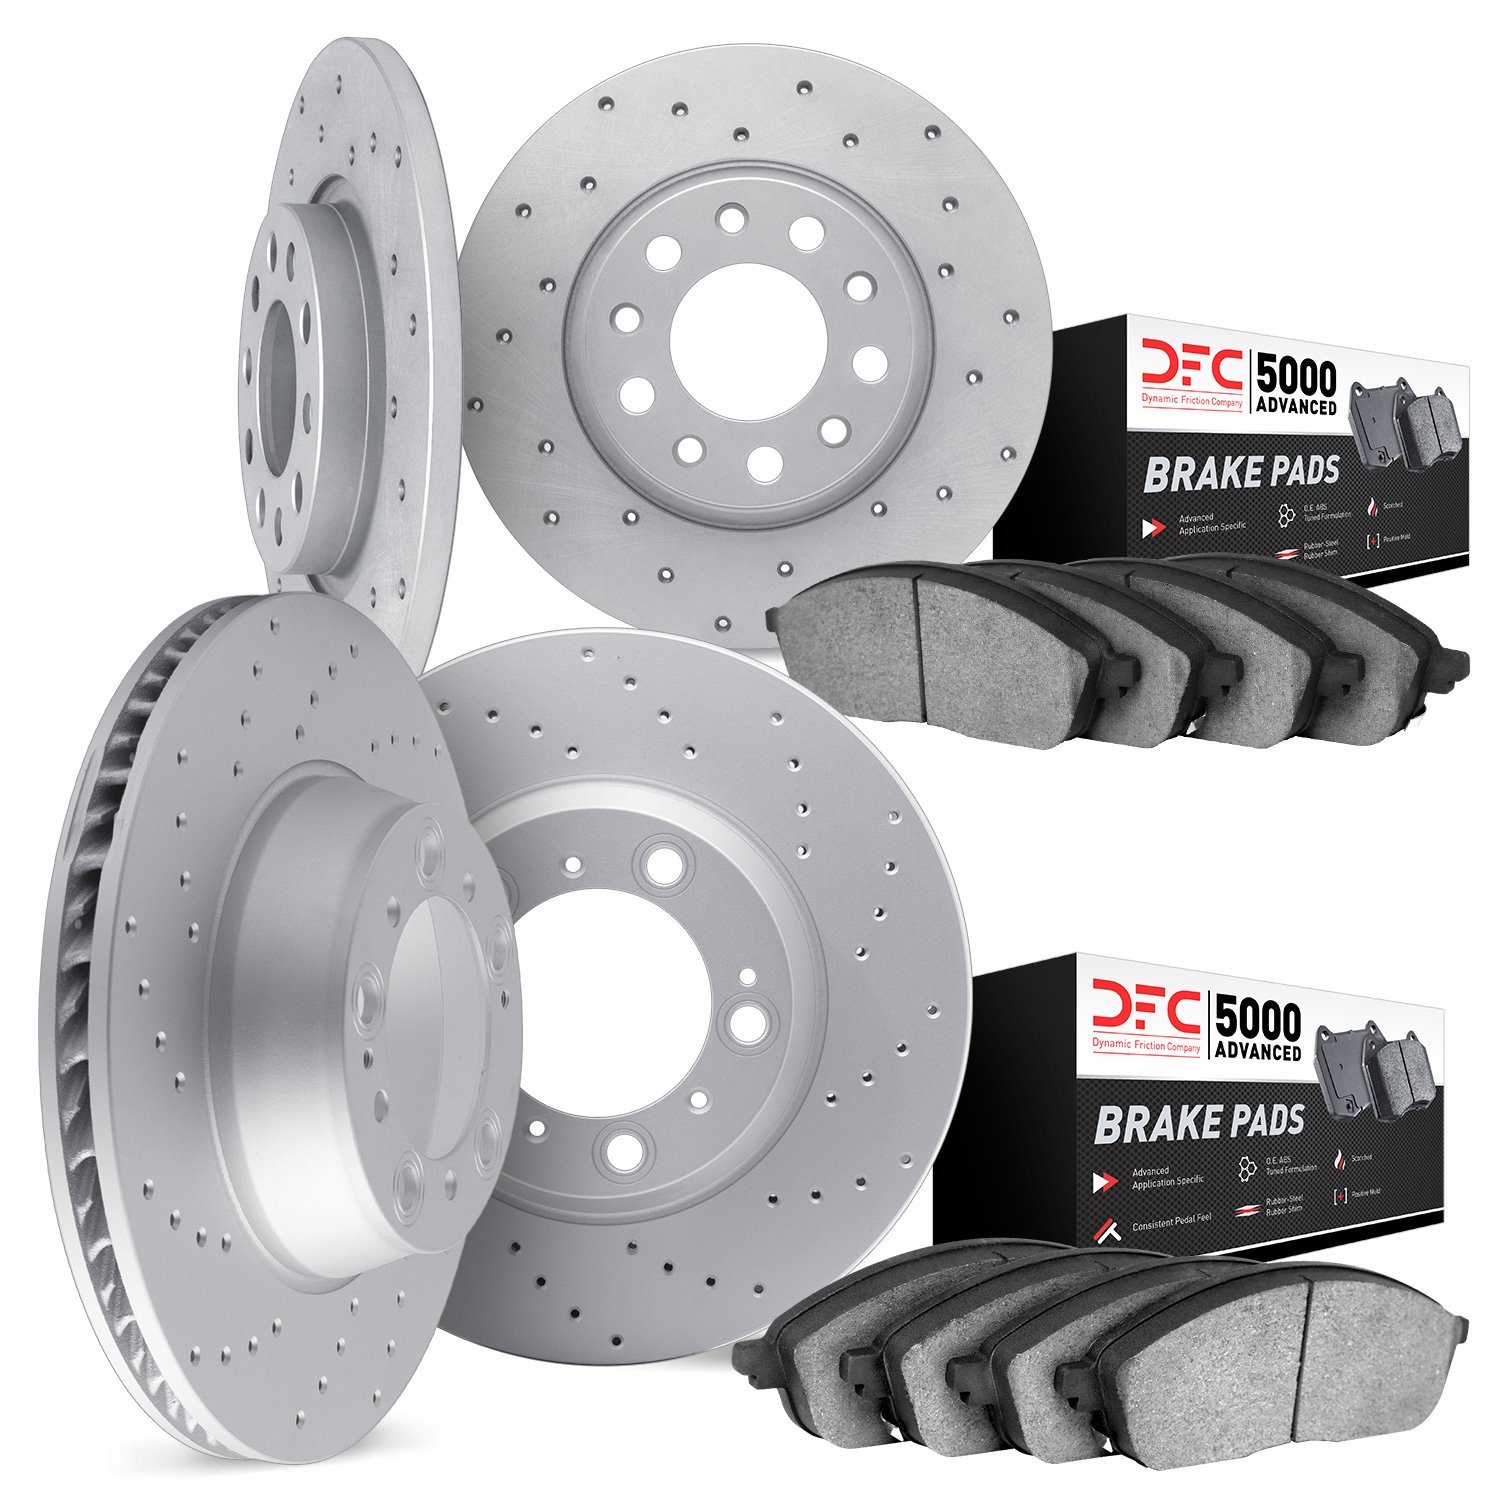 2704-01000 Geoperformance Drilled Brake Rotors with Active Performance Pads Kit, 2007-2014 Suzuki, Position: Front and Rear